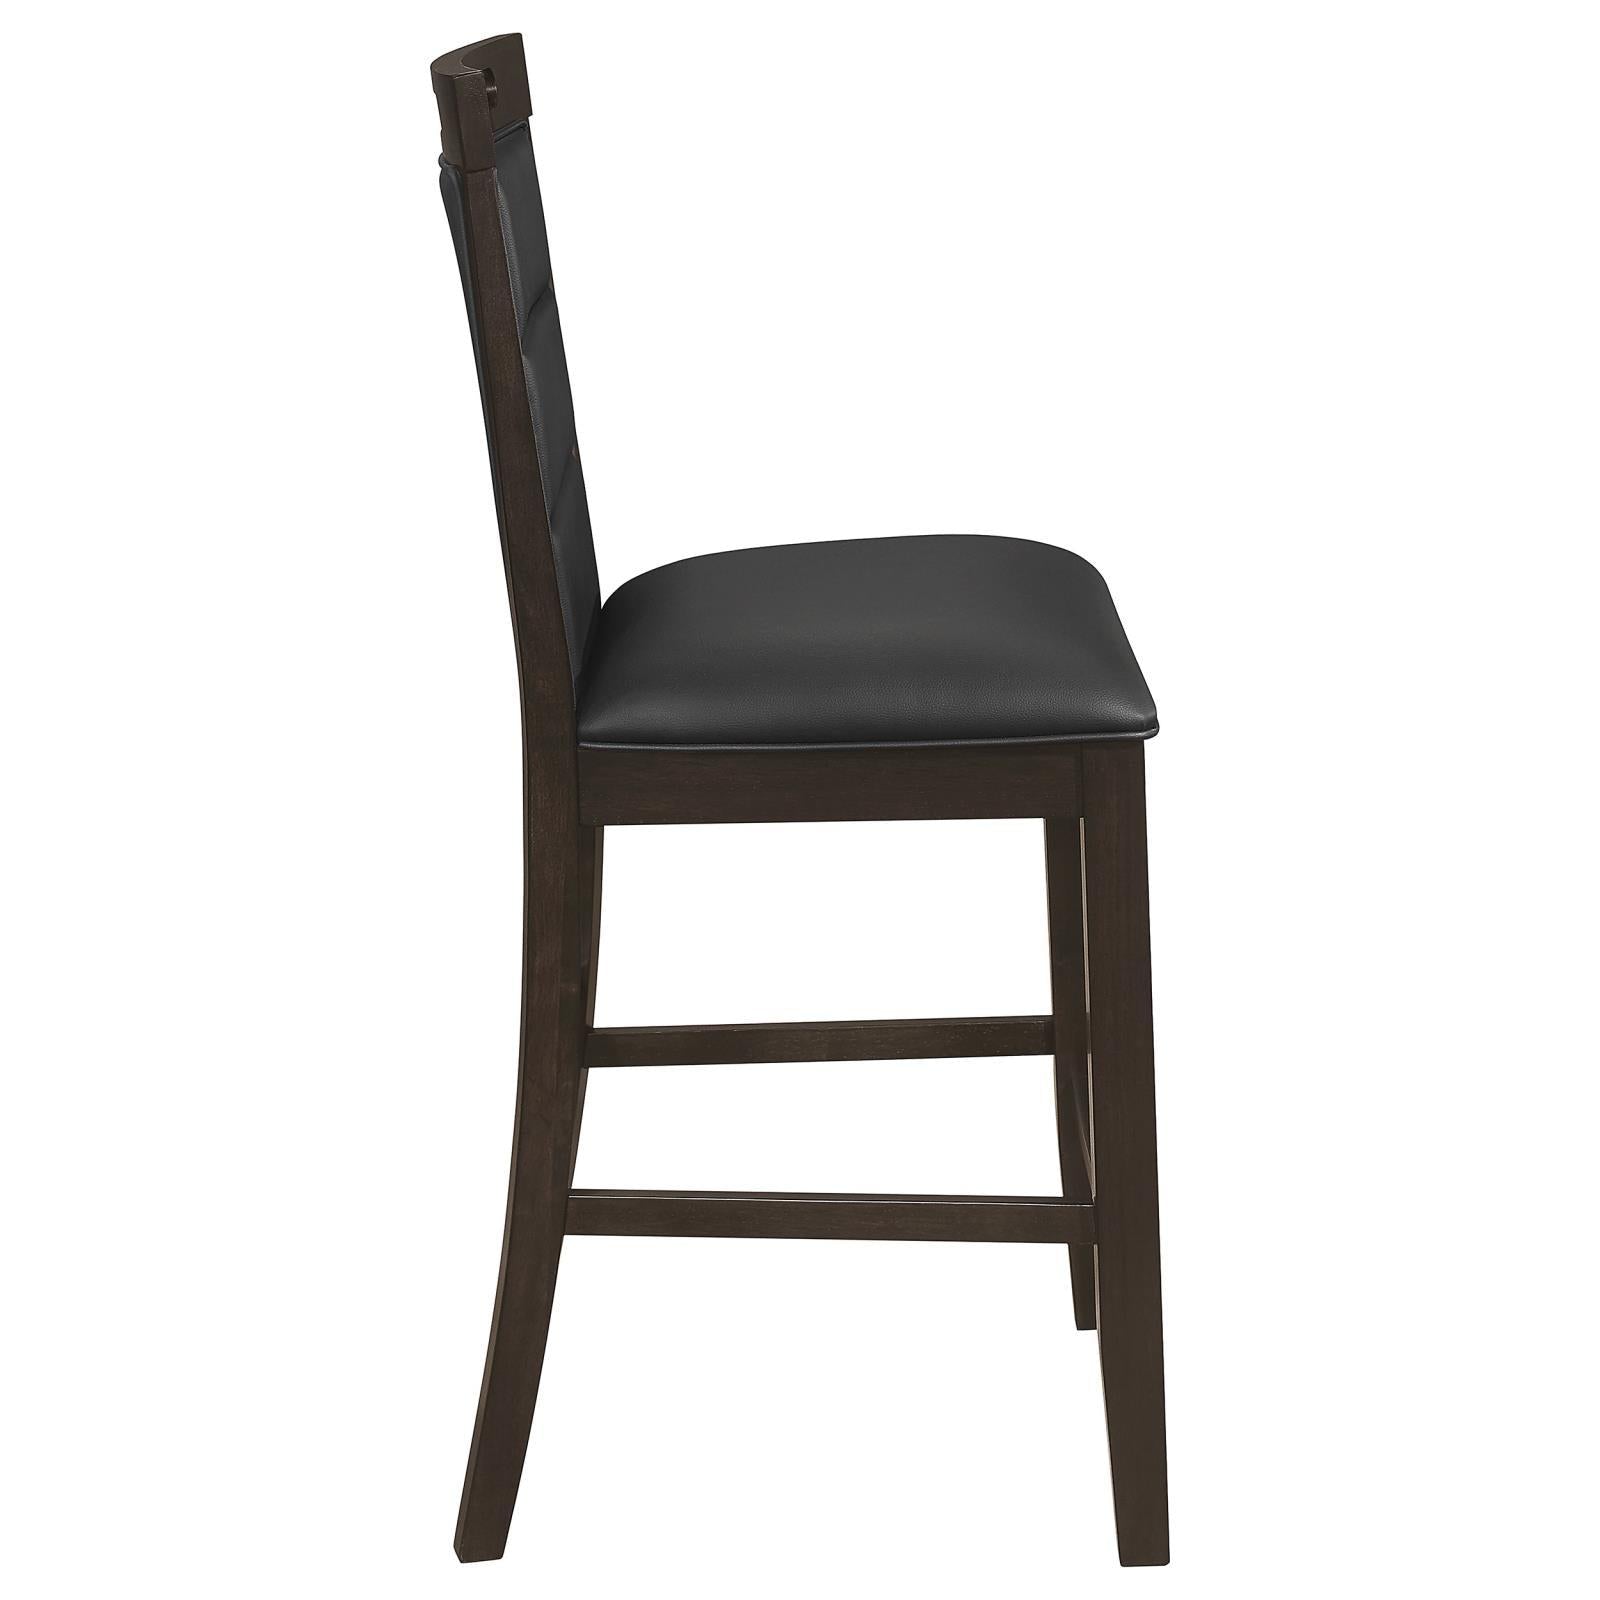 Prentiss Upholstered Counter Height Chair (Set of 2) Black and Cappuccino - Half Price Furniture